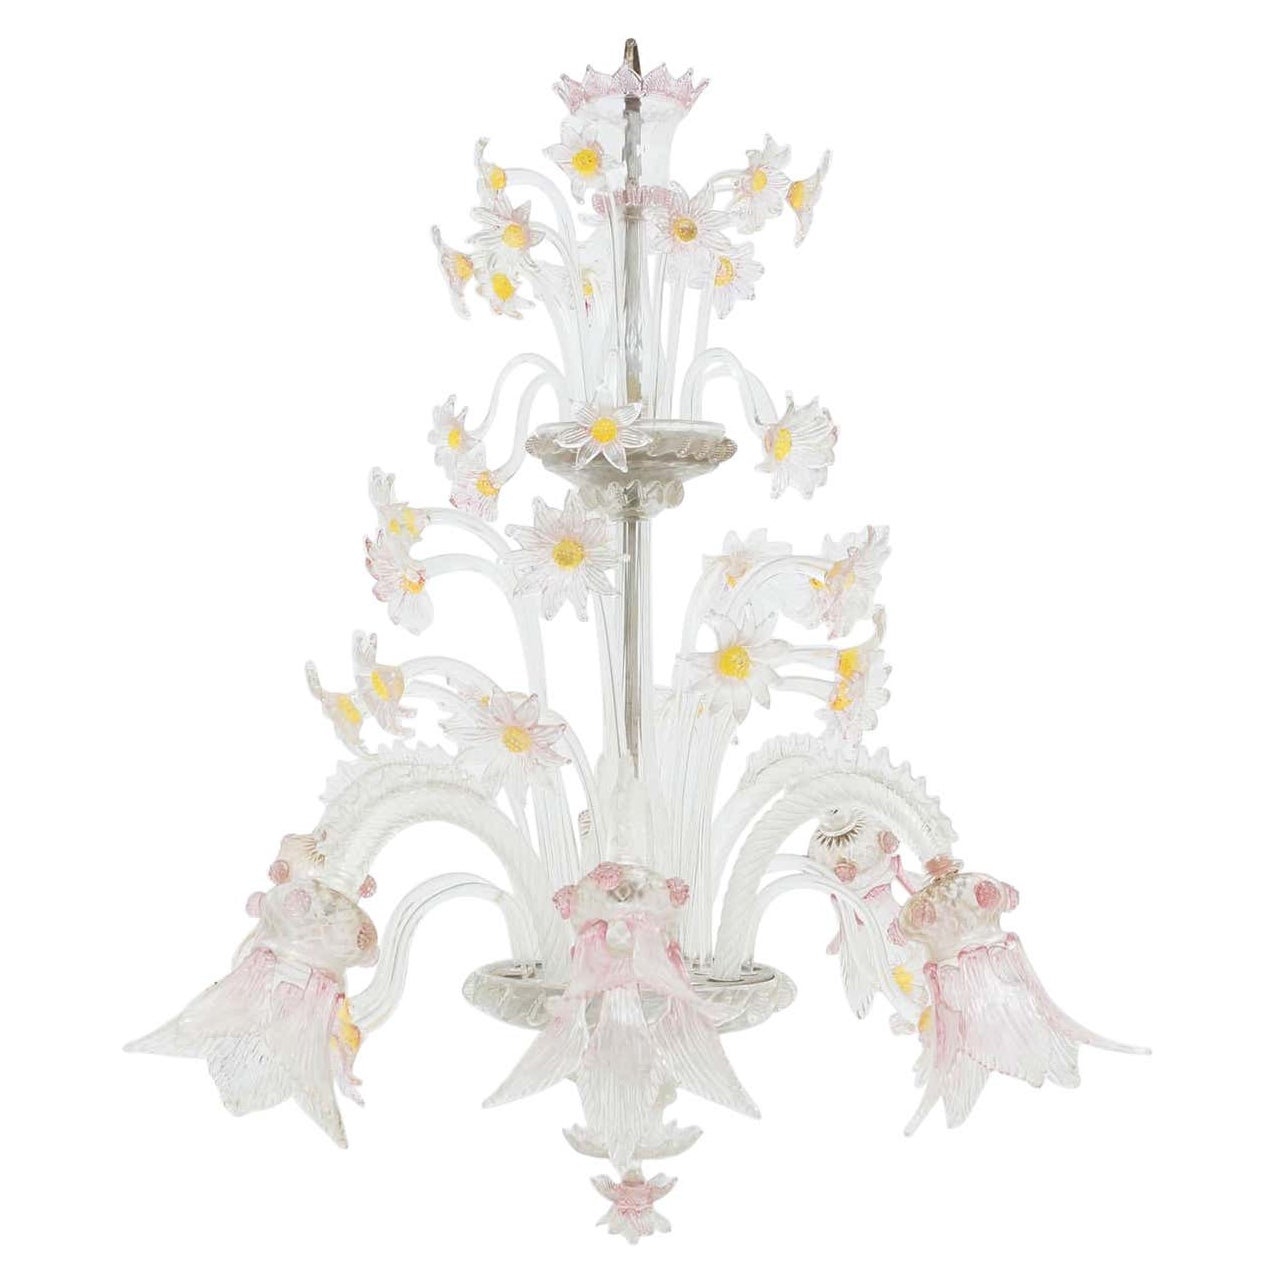 Early 20th Century Venice Murano Glass Floral Ceiling Lamp For Sale